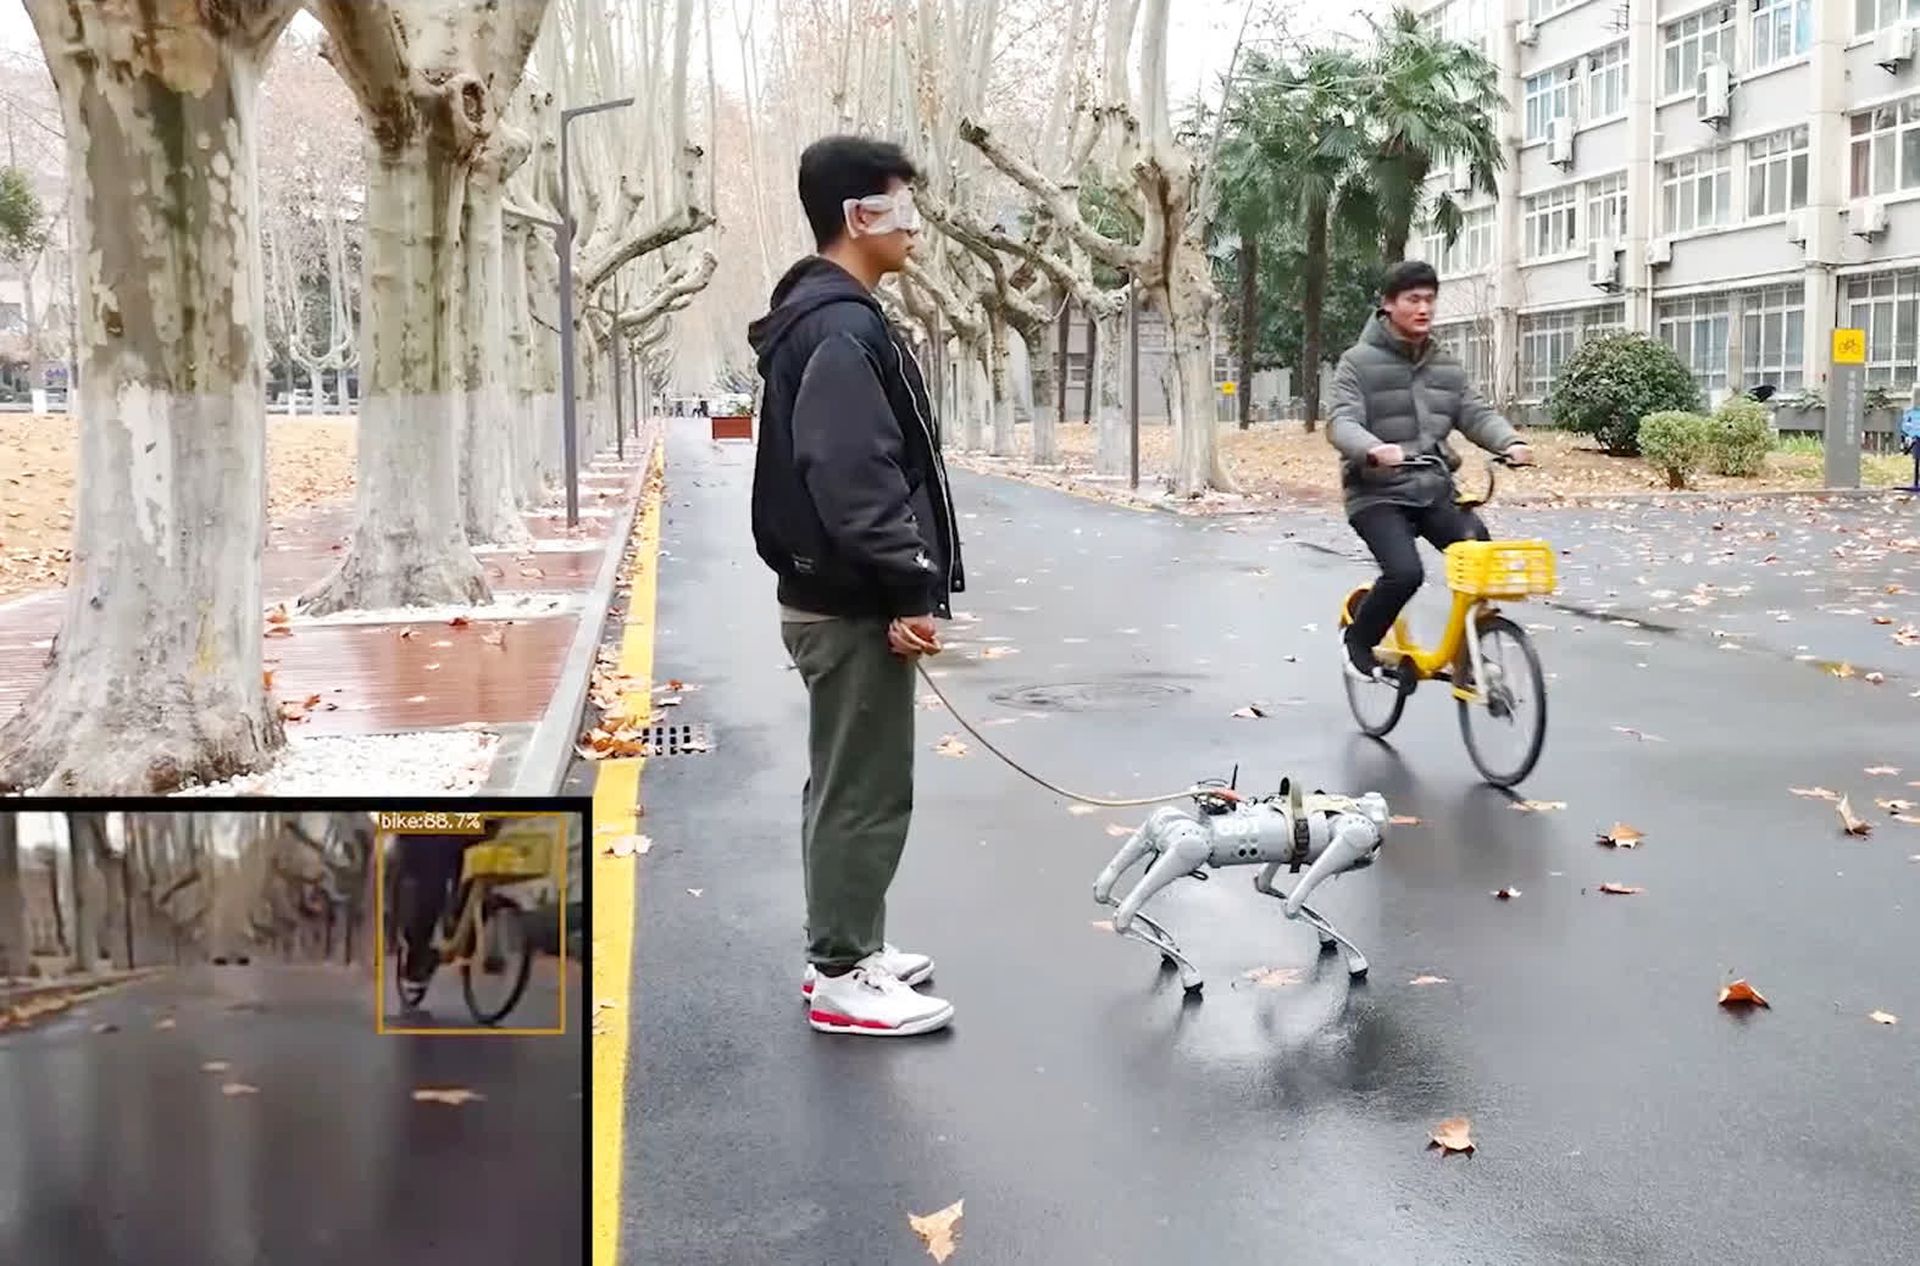 Robots may soon hit the streets in a cute way